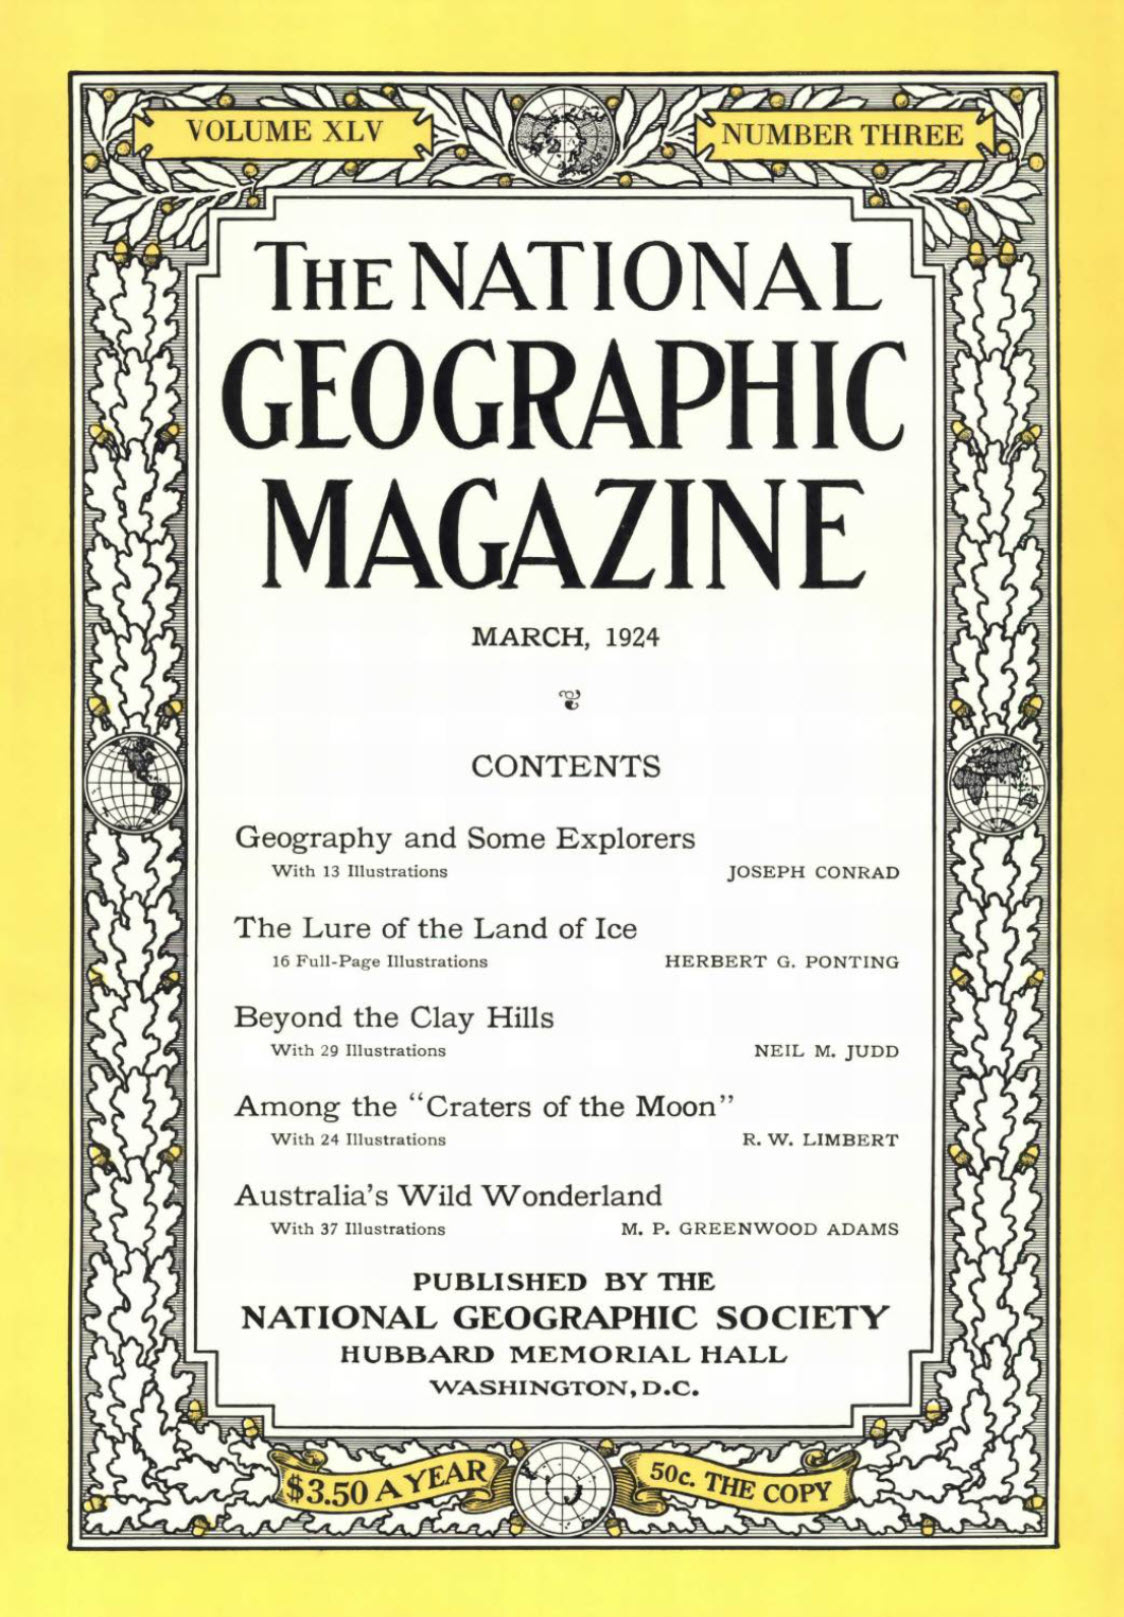 National Geographic, March 1924